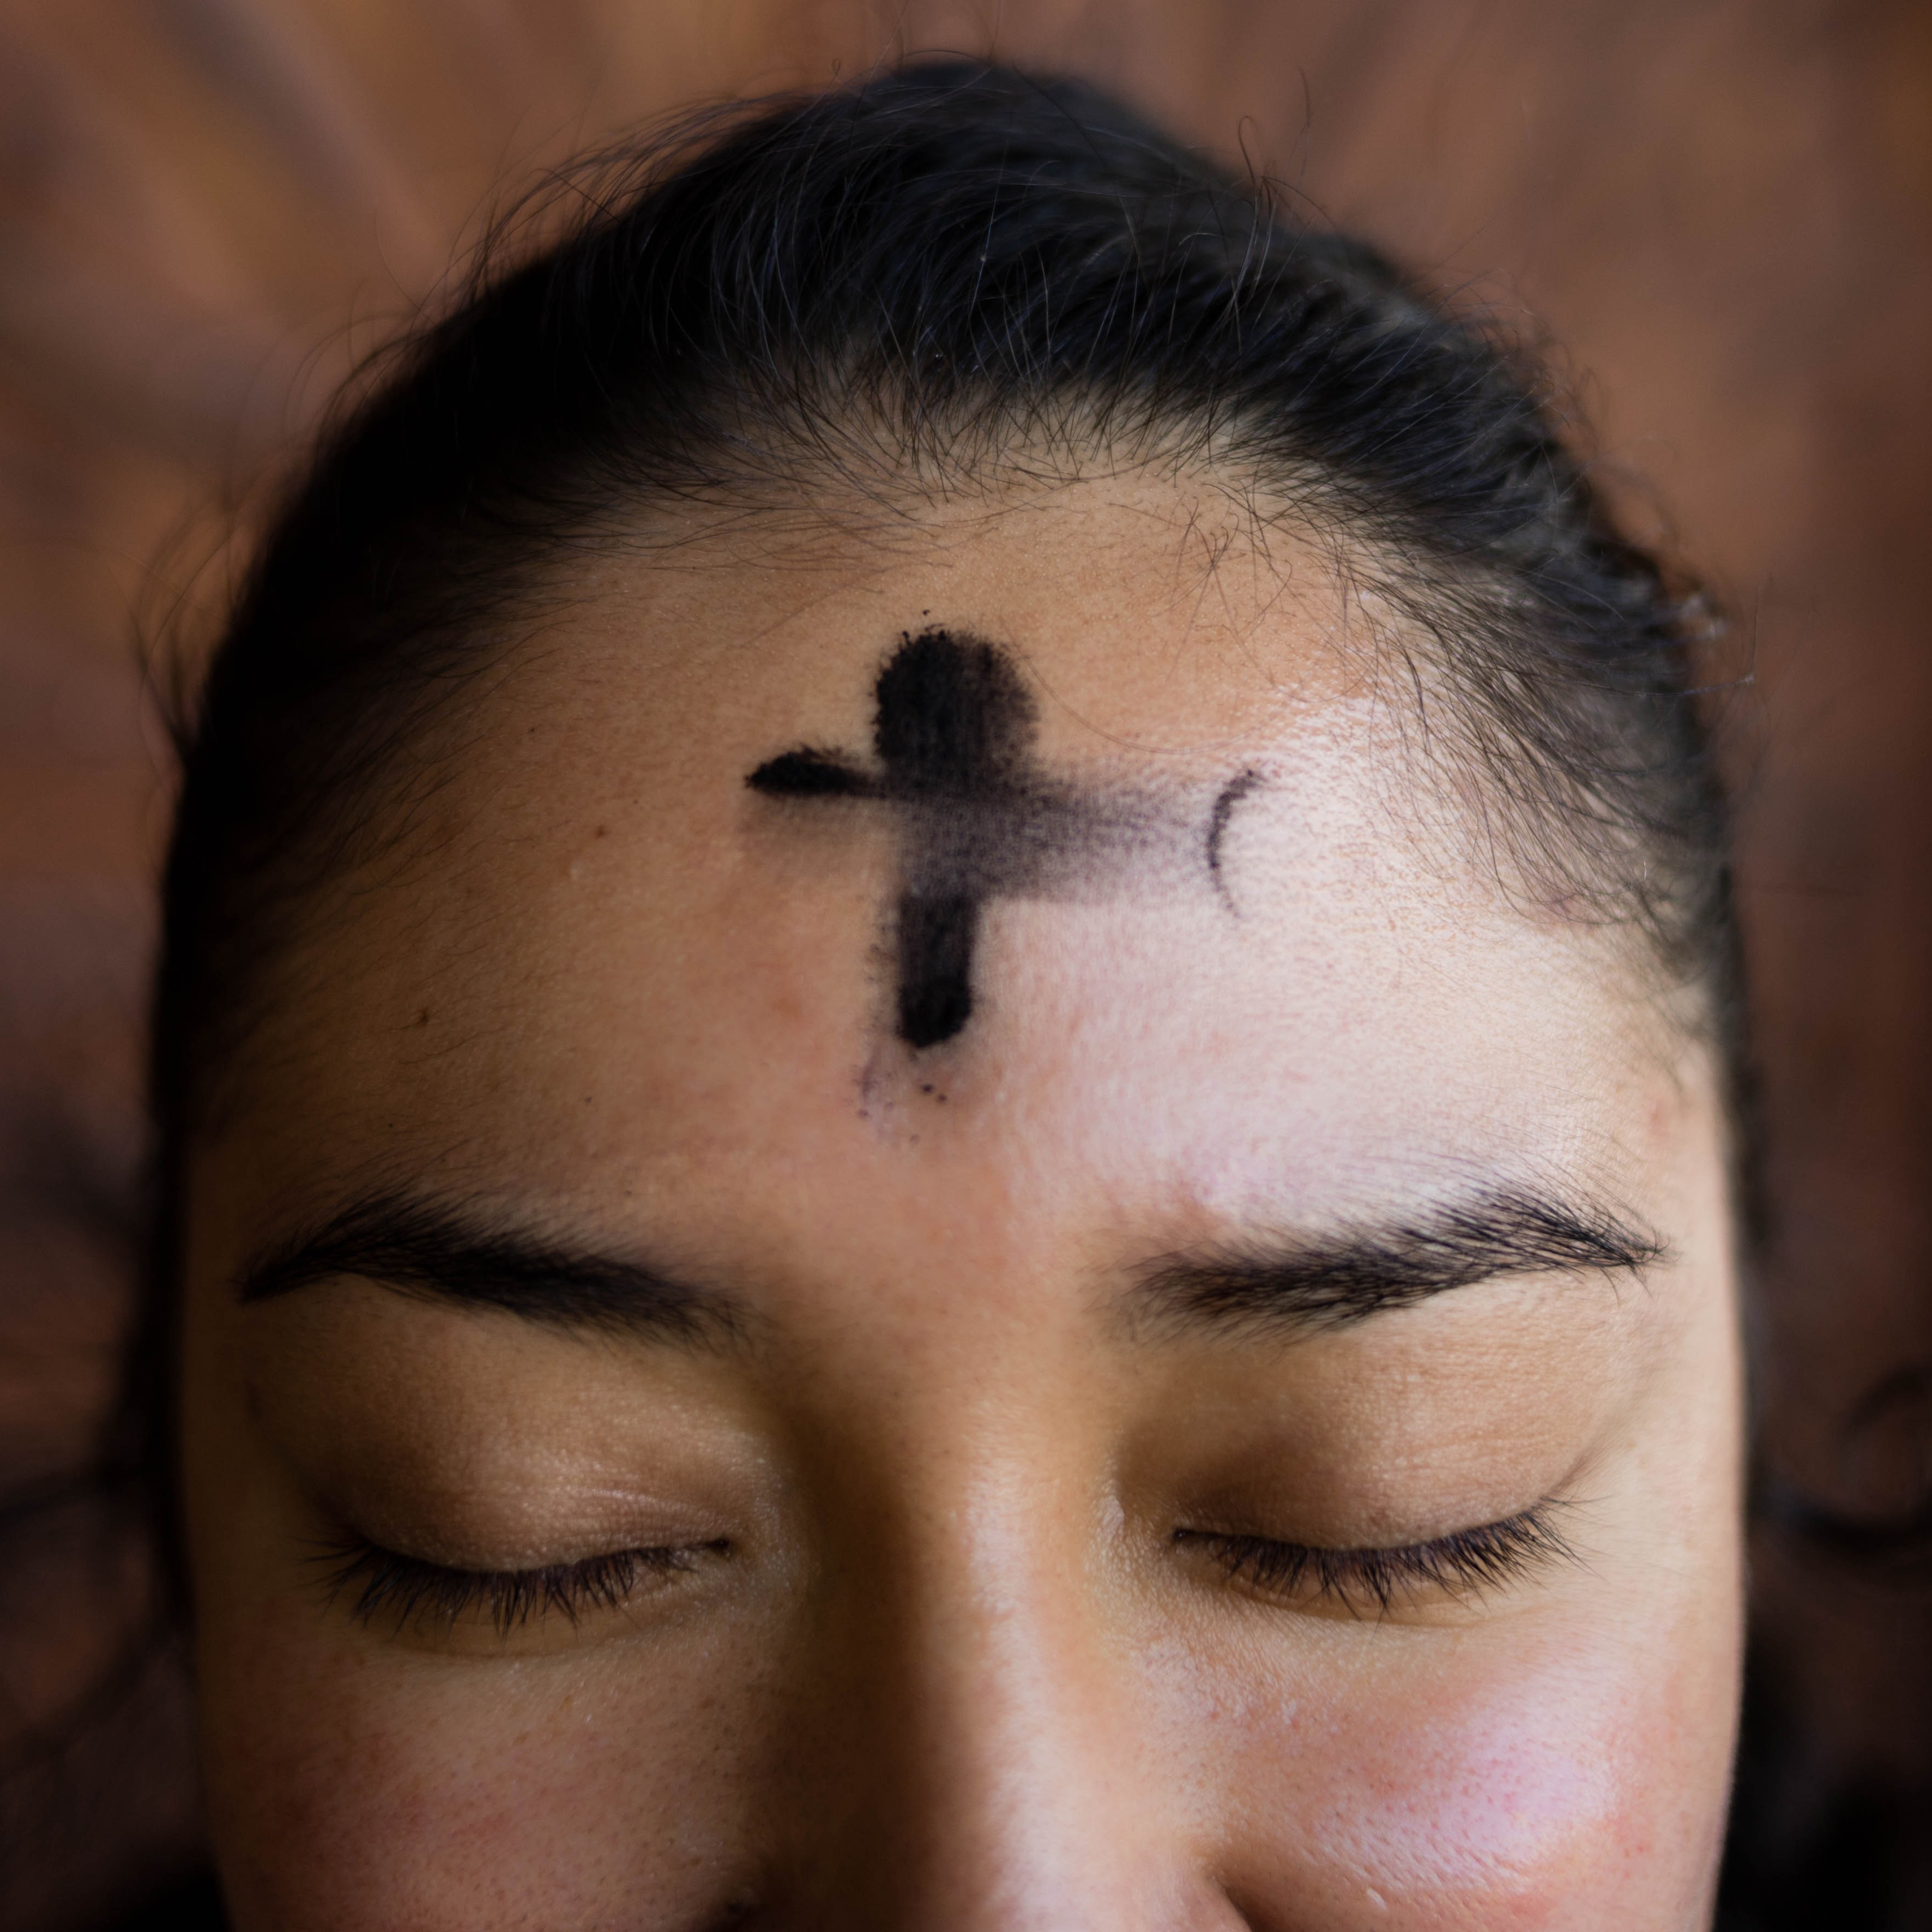 Square photo of Ashes on a forehead